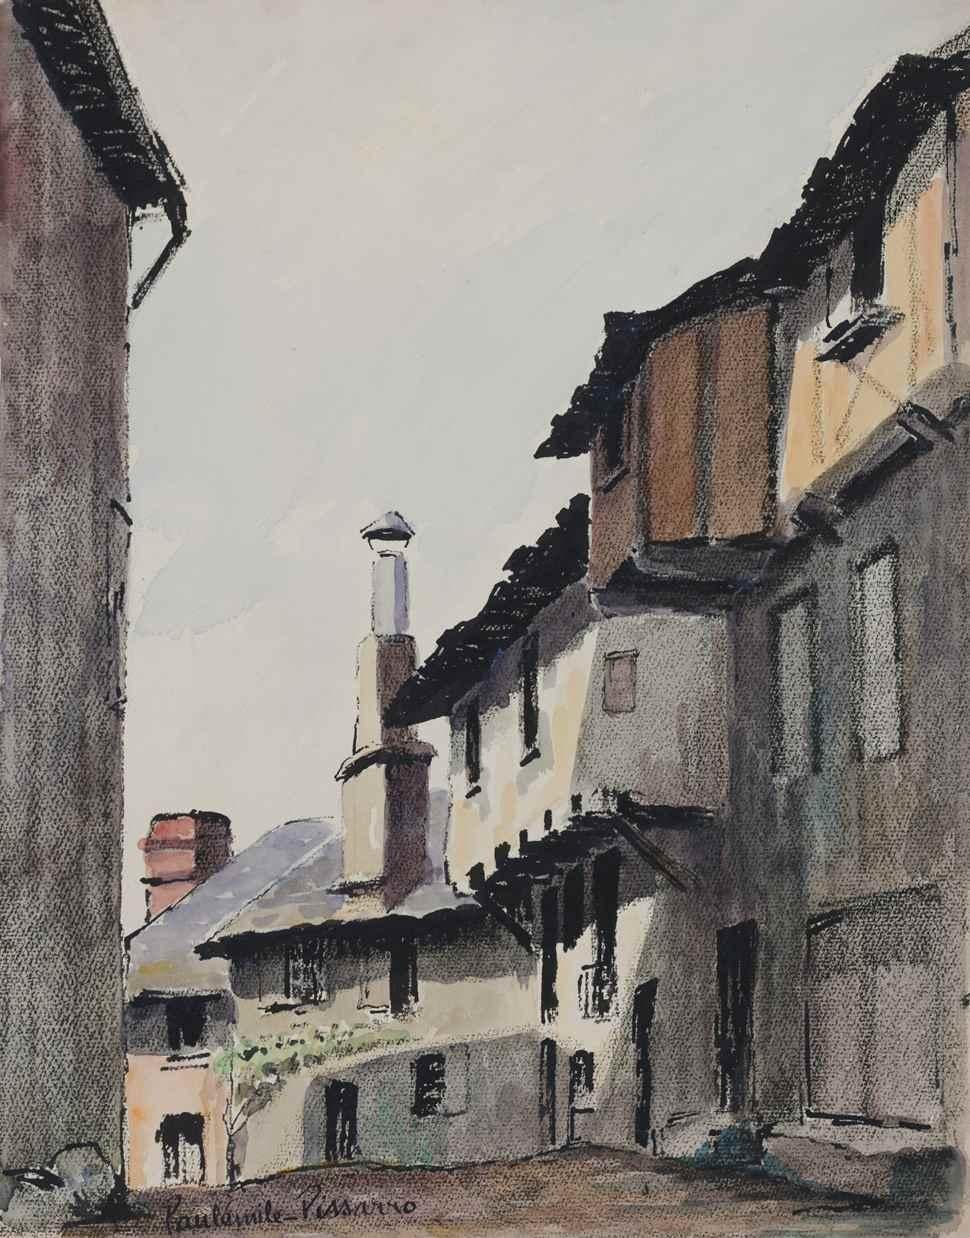 Village in Normandy by Paulémile Pissarro (1884 - 1972) 

Watercolour, ink and charcoal on paper
40 x 31.2 cm (15 ³/₄ x 12 ¹/₄ inches)
Signed lower left, Paulémile Pissarro
Executed in 1920

SOLD UNFRAMED 

This work is accompanied by a certificate